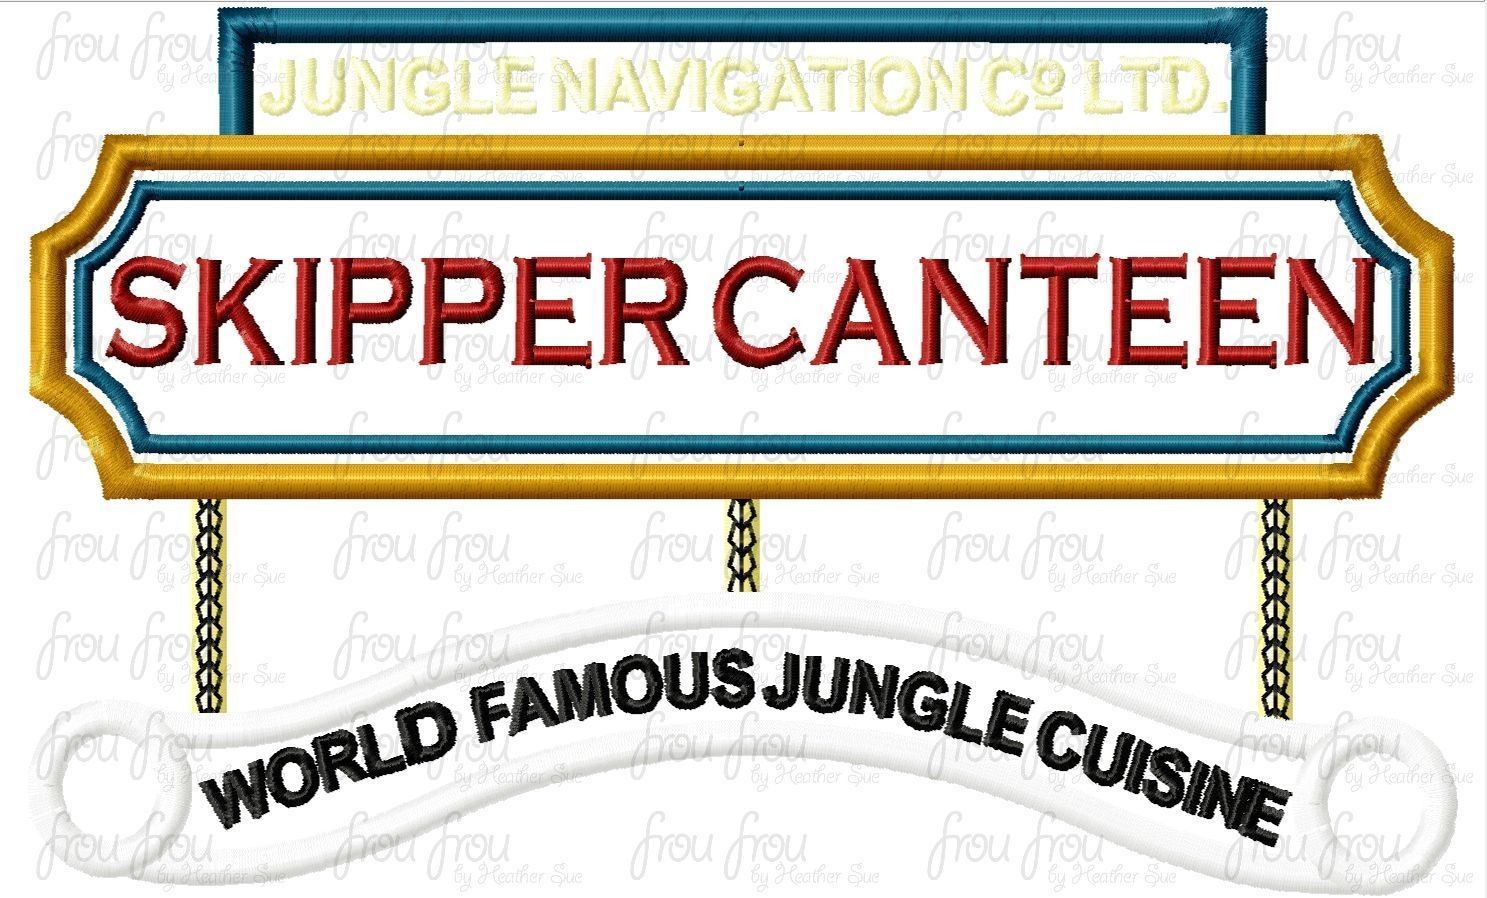 Skipper's Canteen Restaurant Logo Wording Machine Applique Embroidery Design, multiple sizes including 3